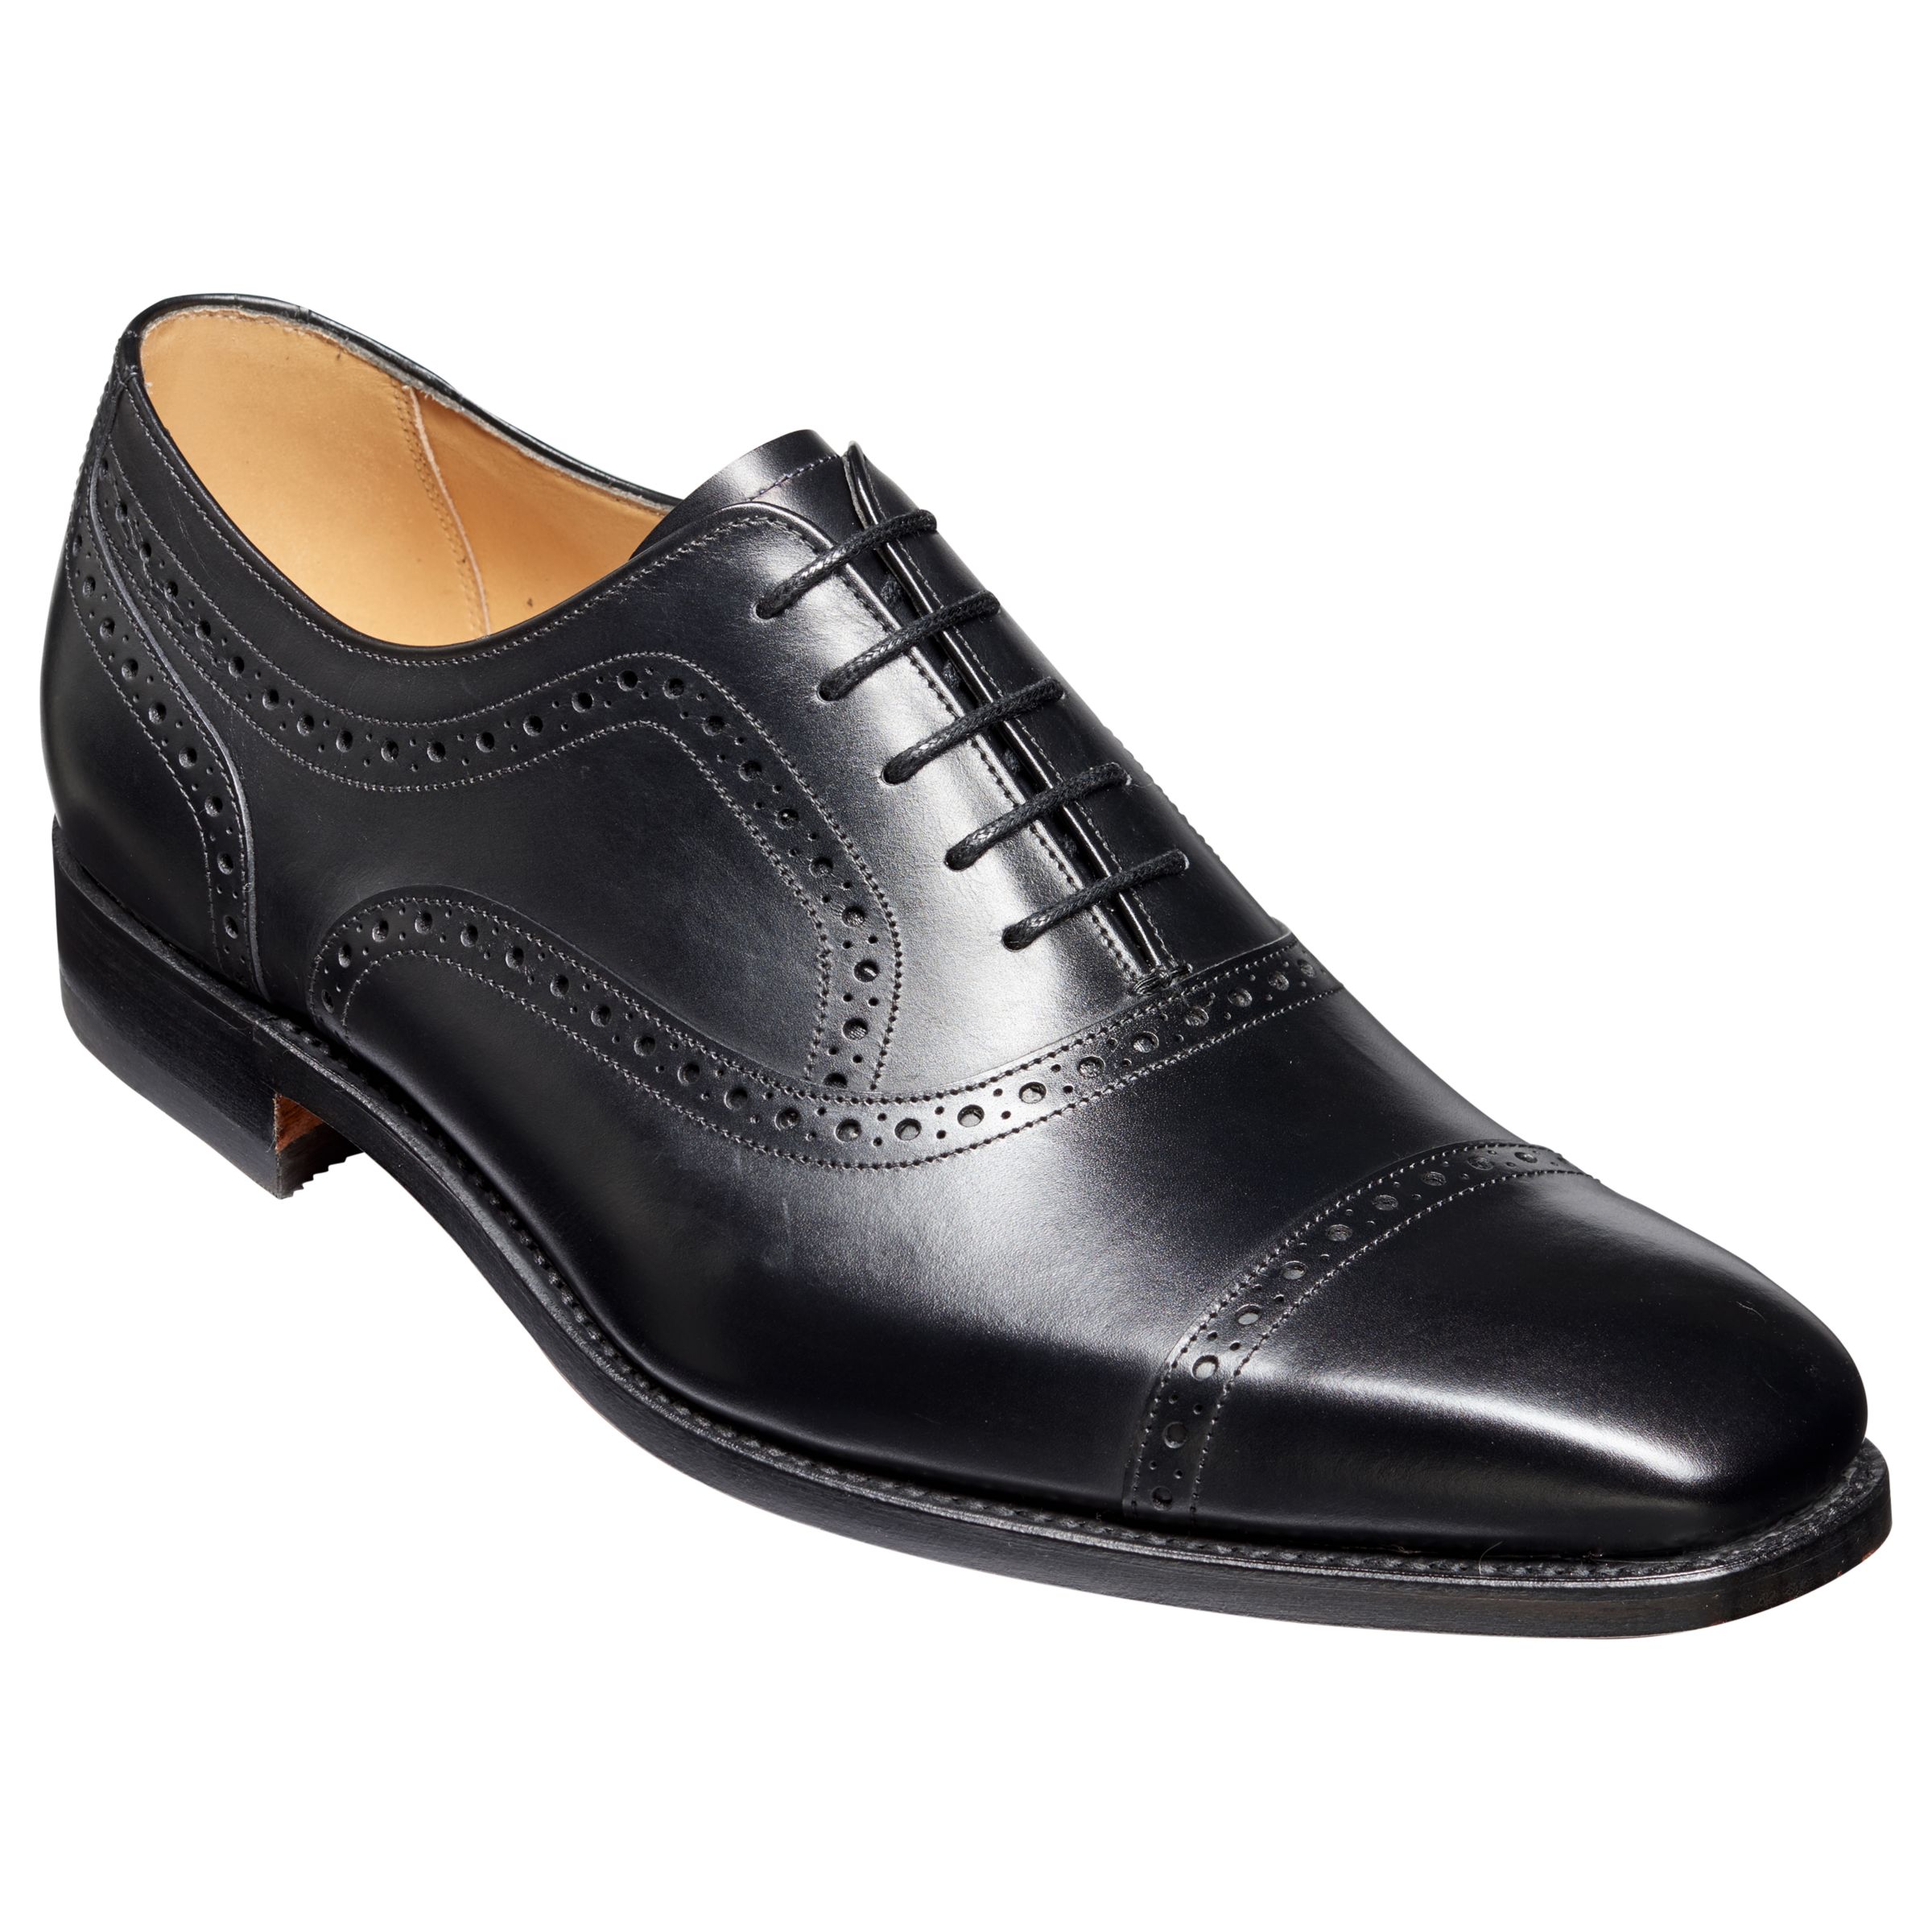 Barker Luke Leather Goodyear Welted Brogues, Black at John Lewis